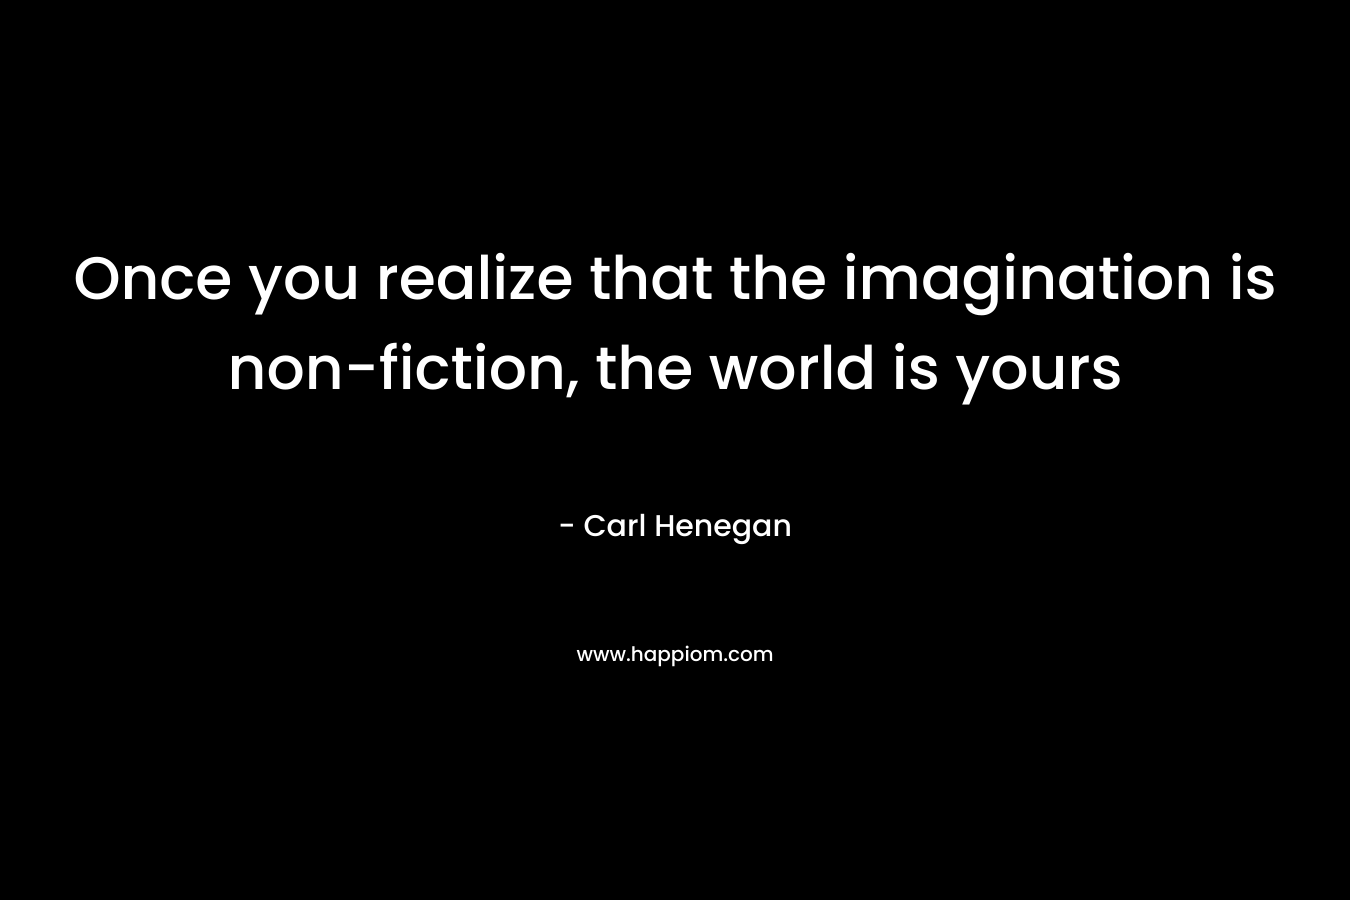 Once you realize that the imagination is non-fiction, the world is yours